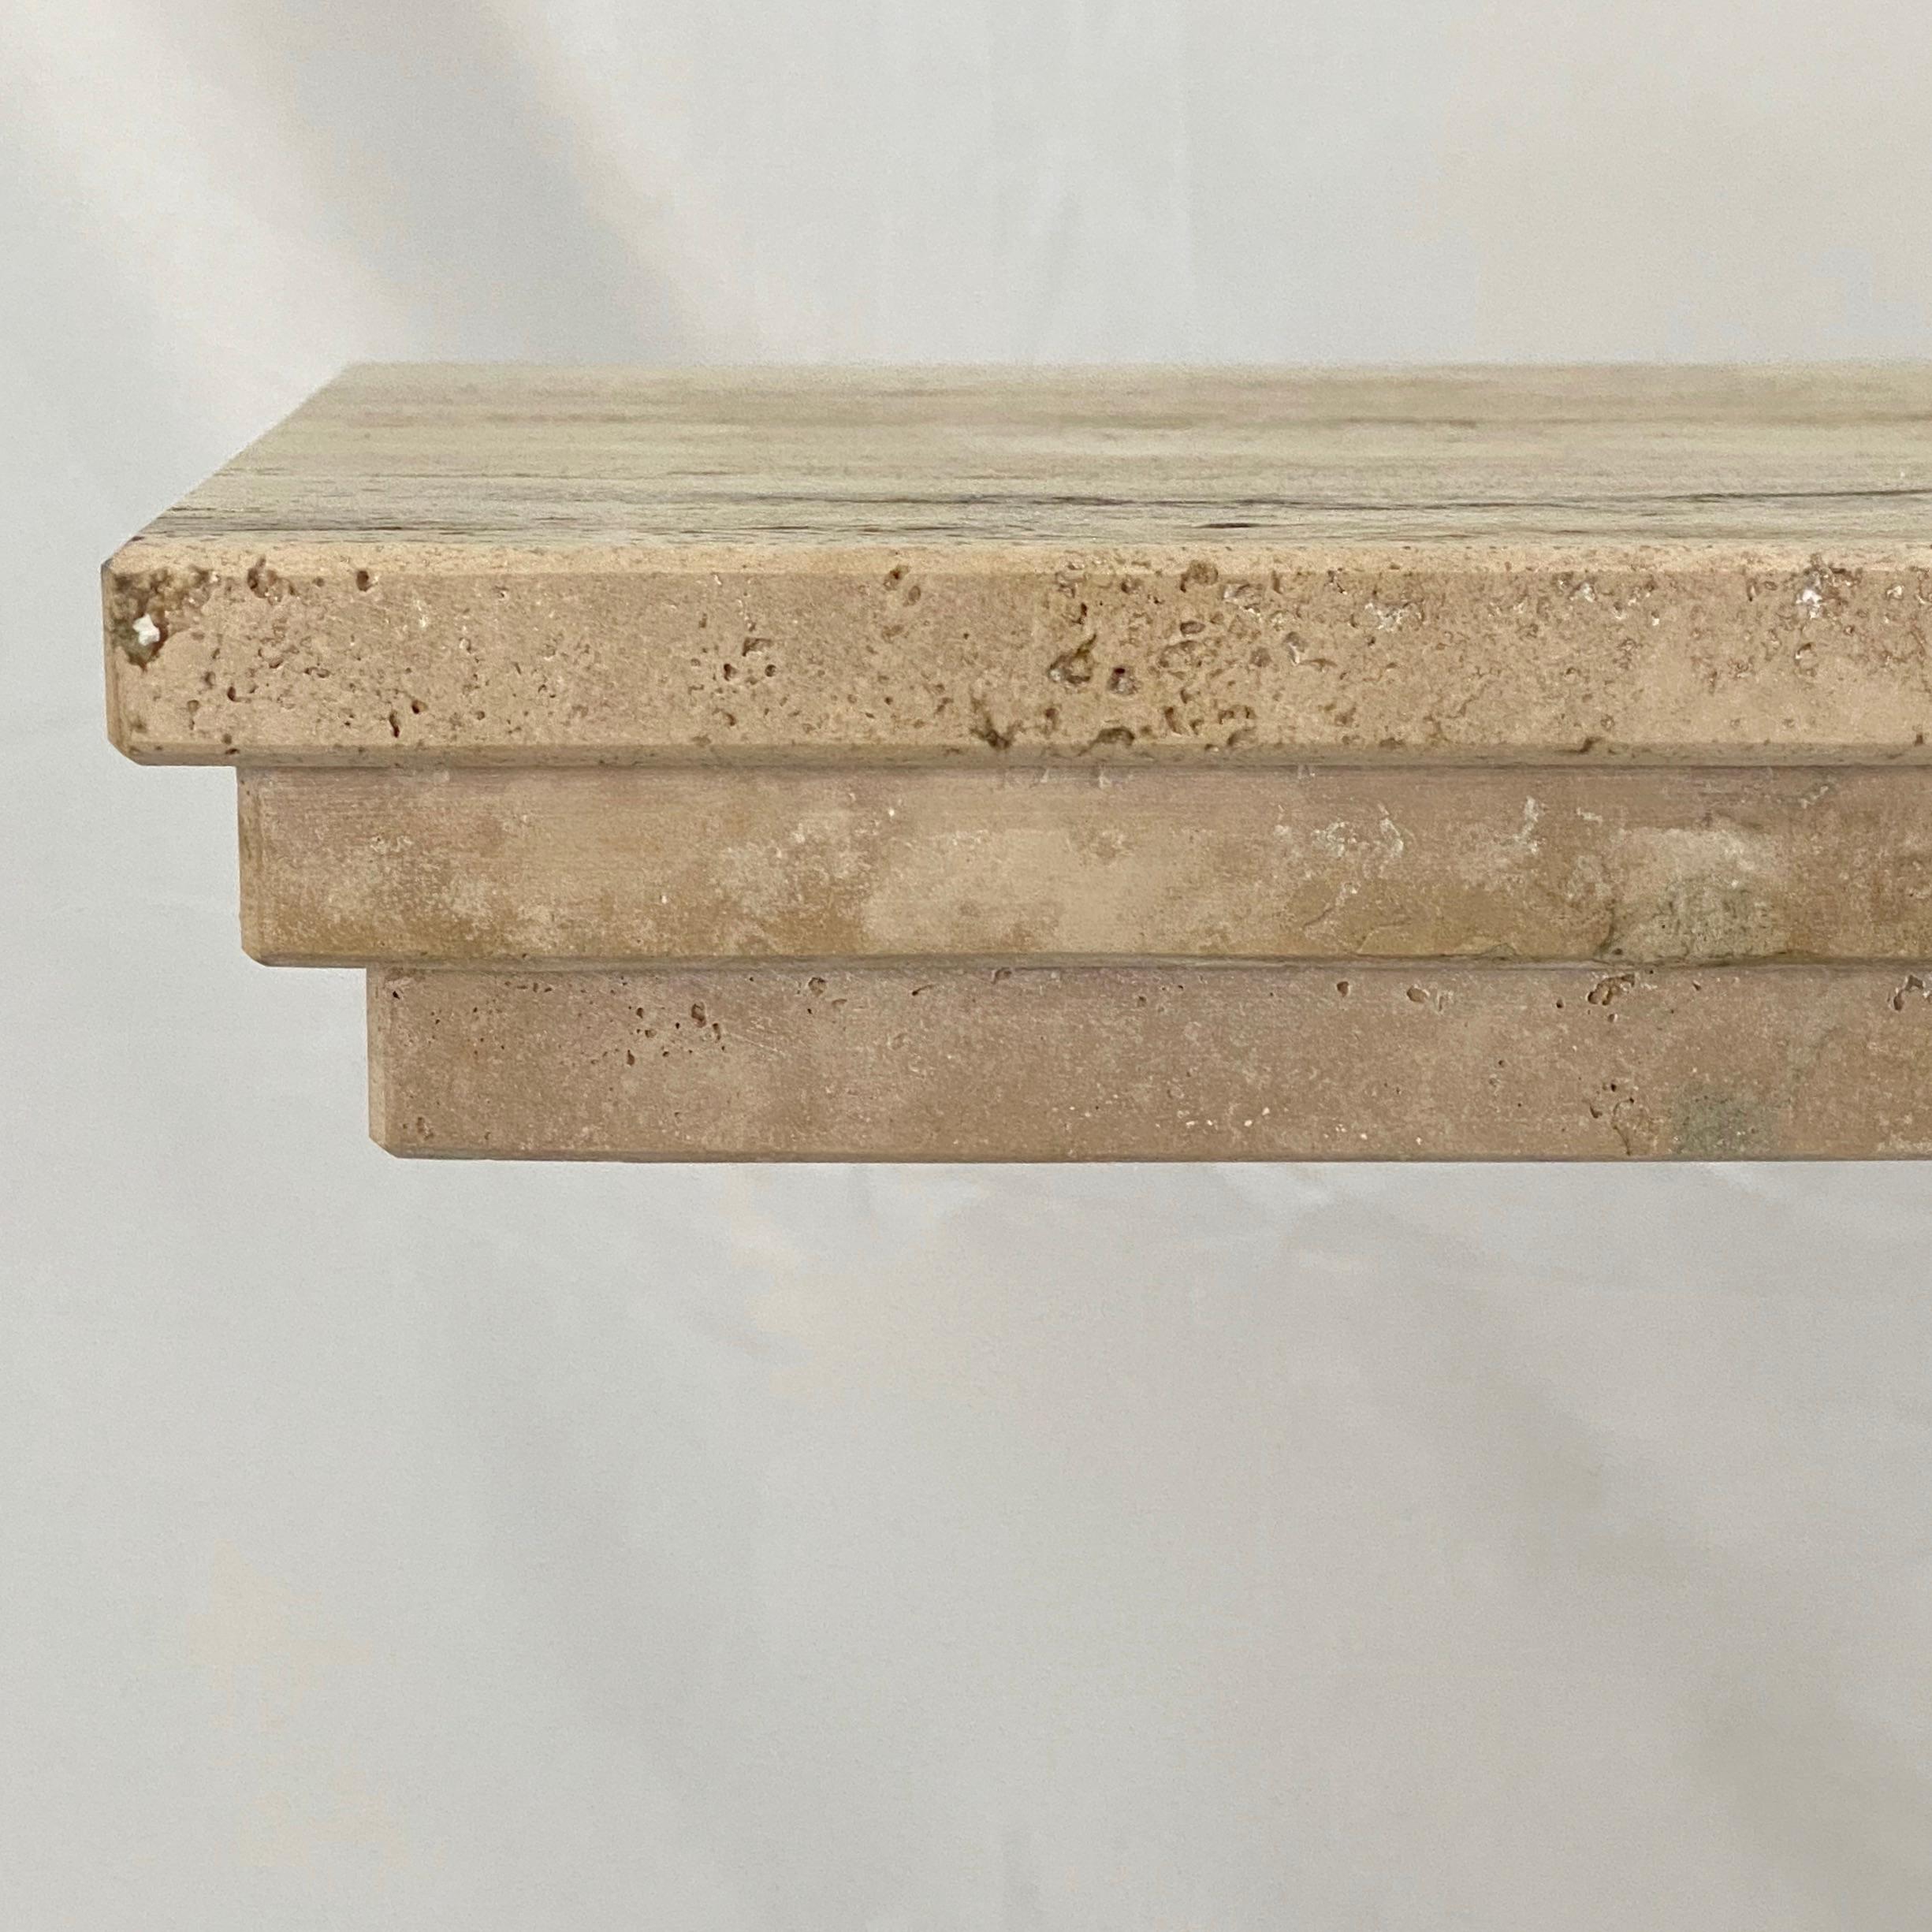 Hand-Carved Contemporary Italian Minimalist Organic White Beige Travertine Marble Console For Sale